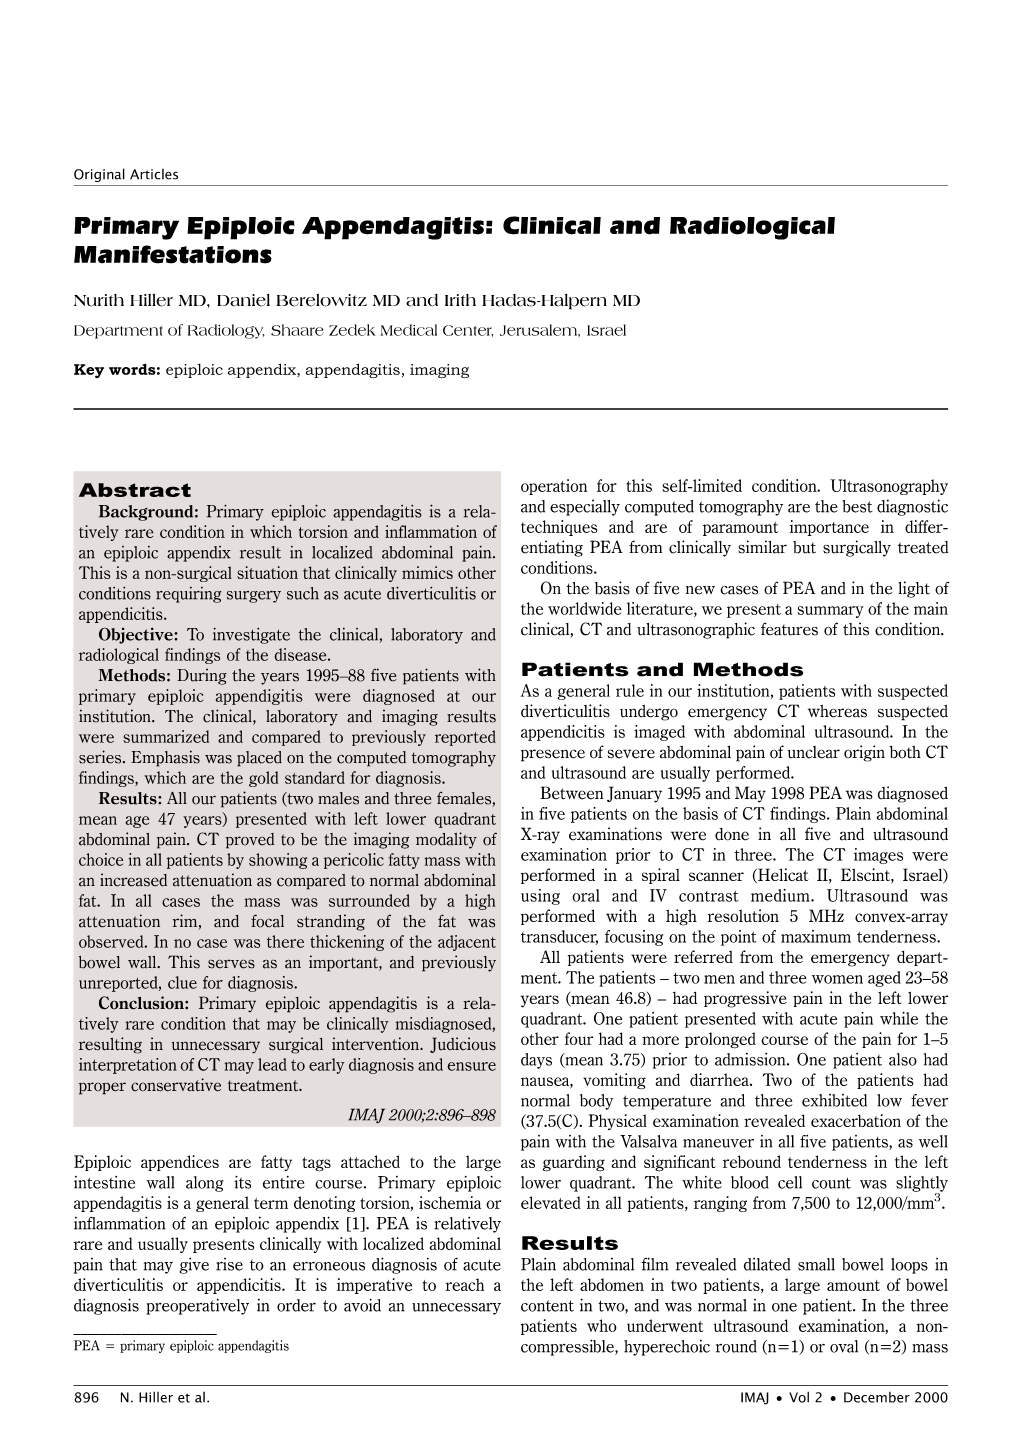 Primary Epiploic Appendagitis: Clinical and Radiological Manifestations